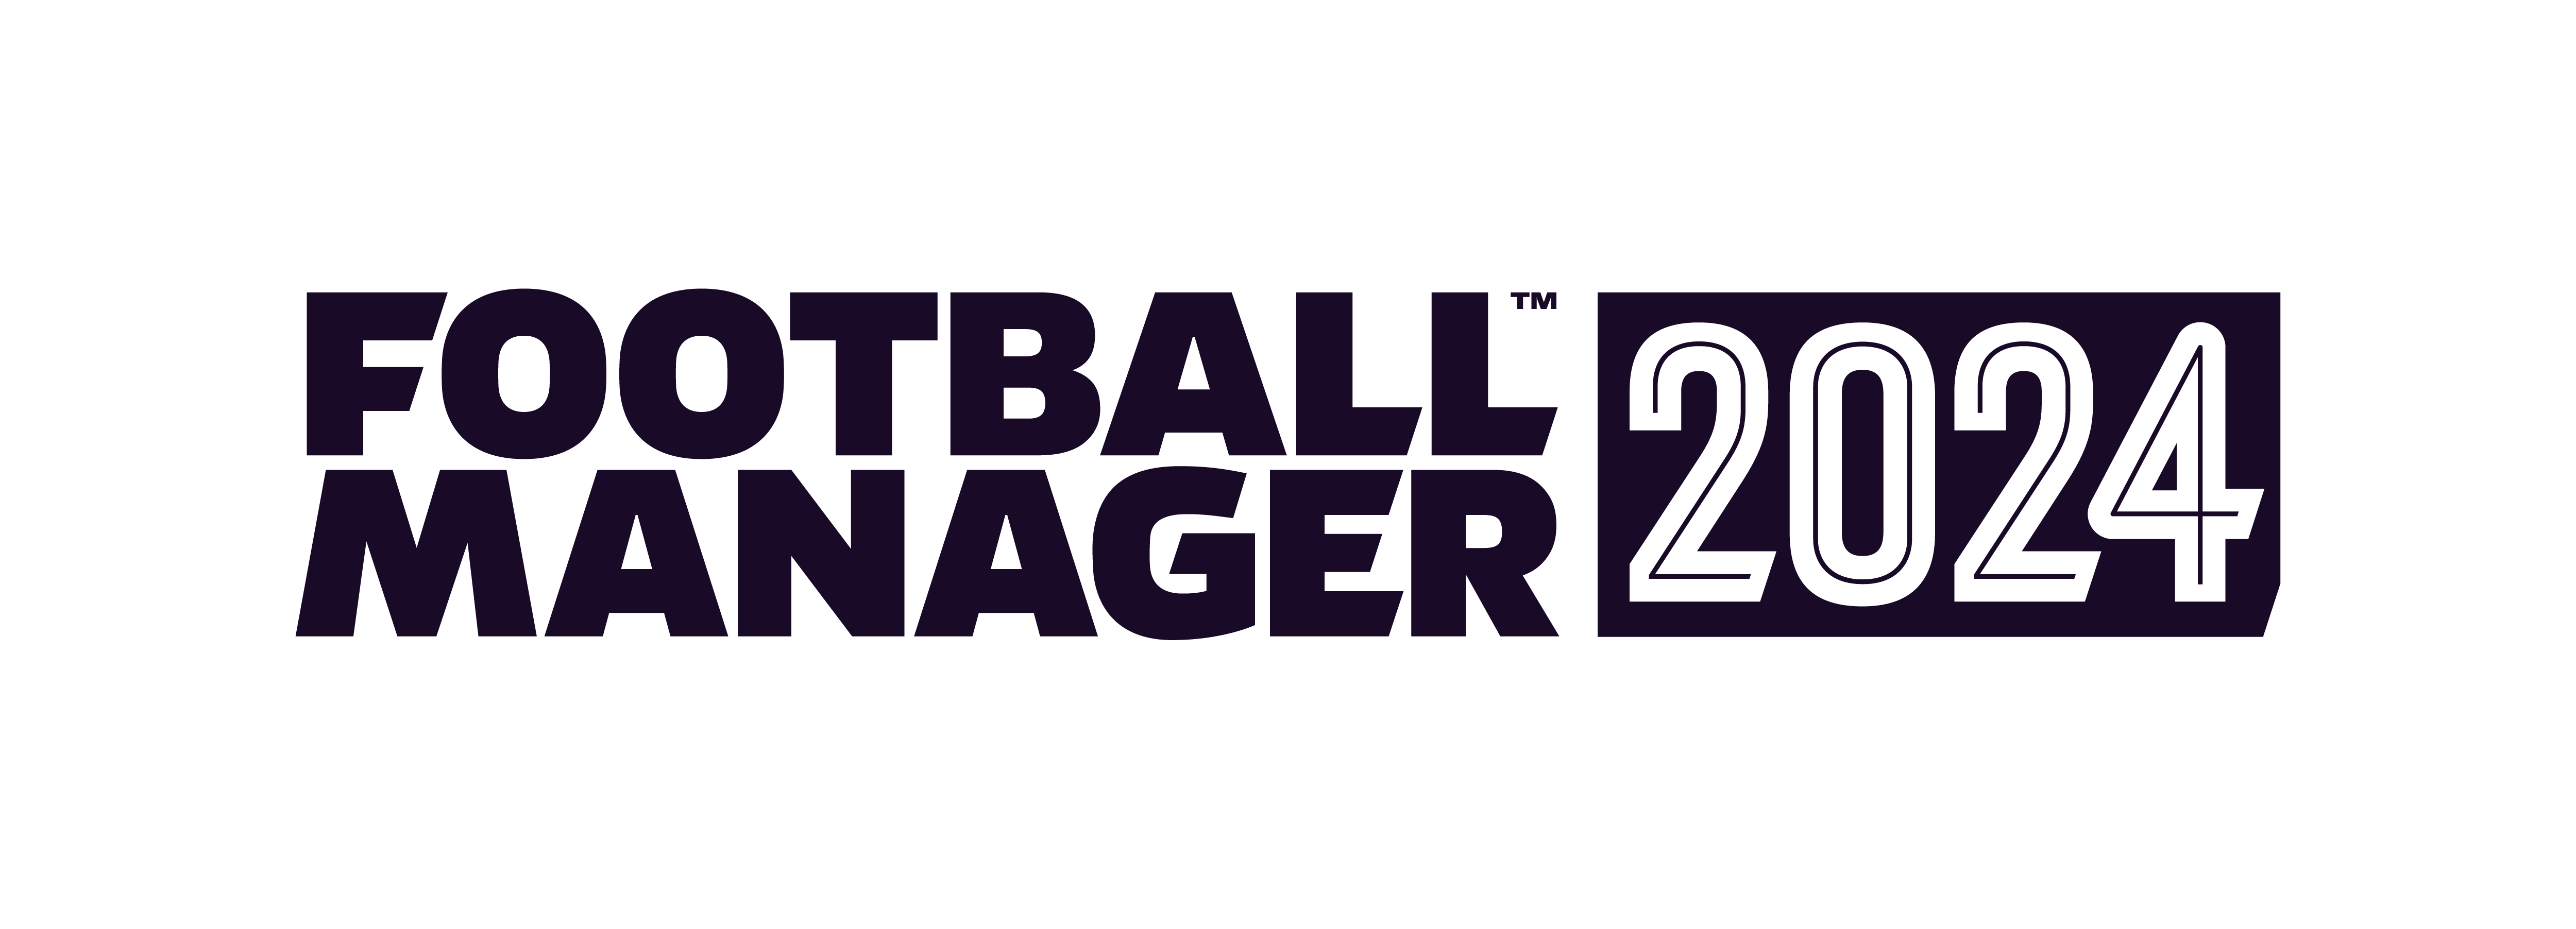 Football-Manager-2024-full-game-cracked